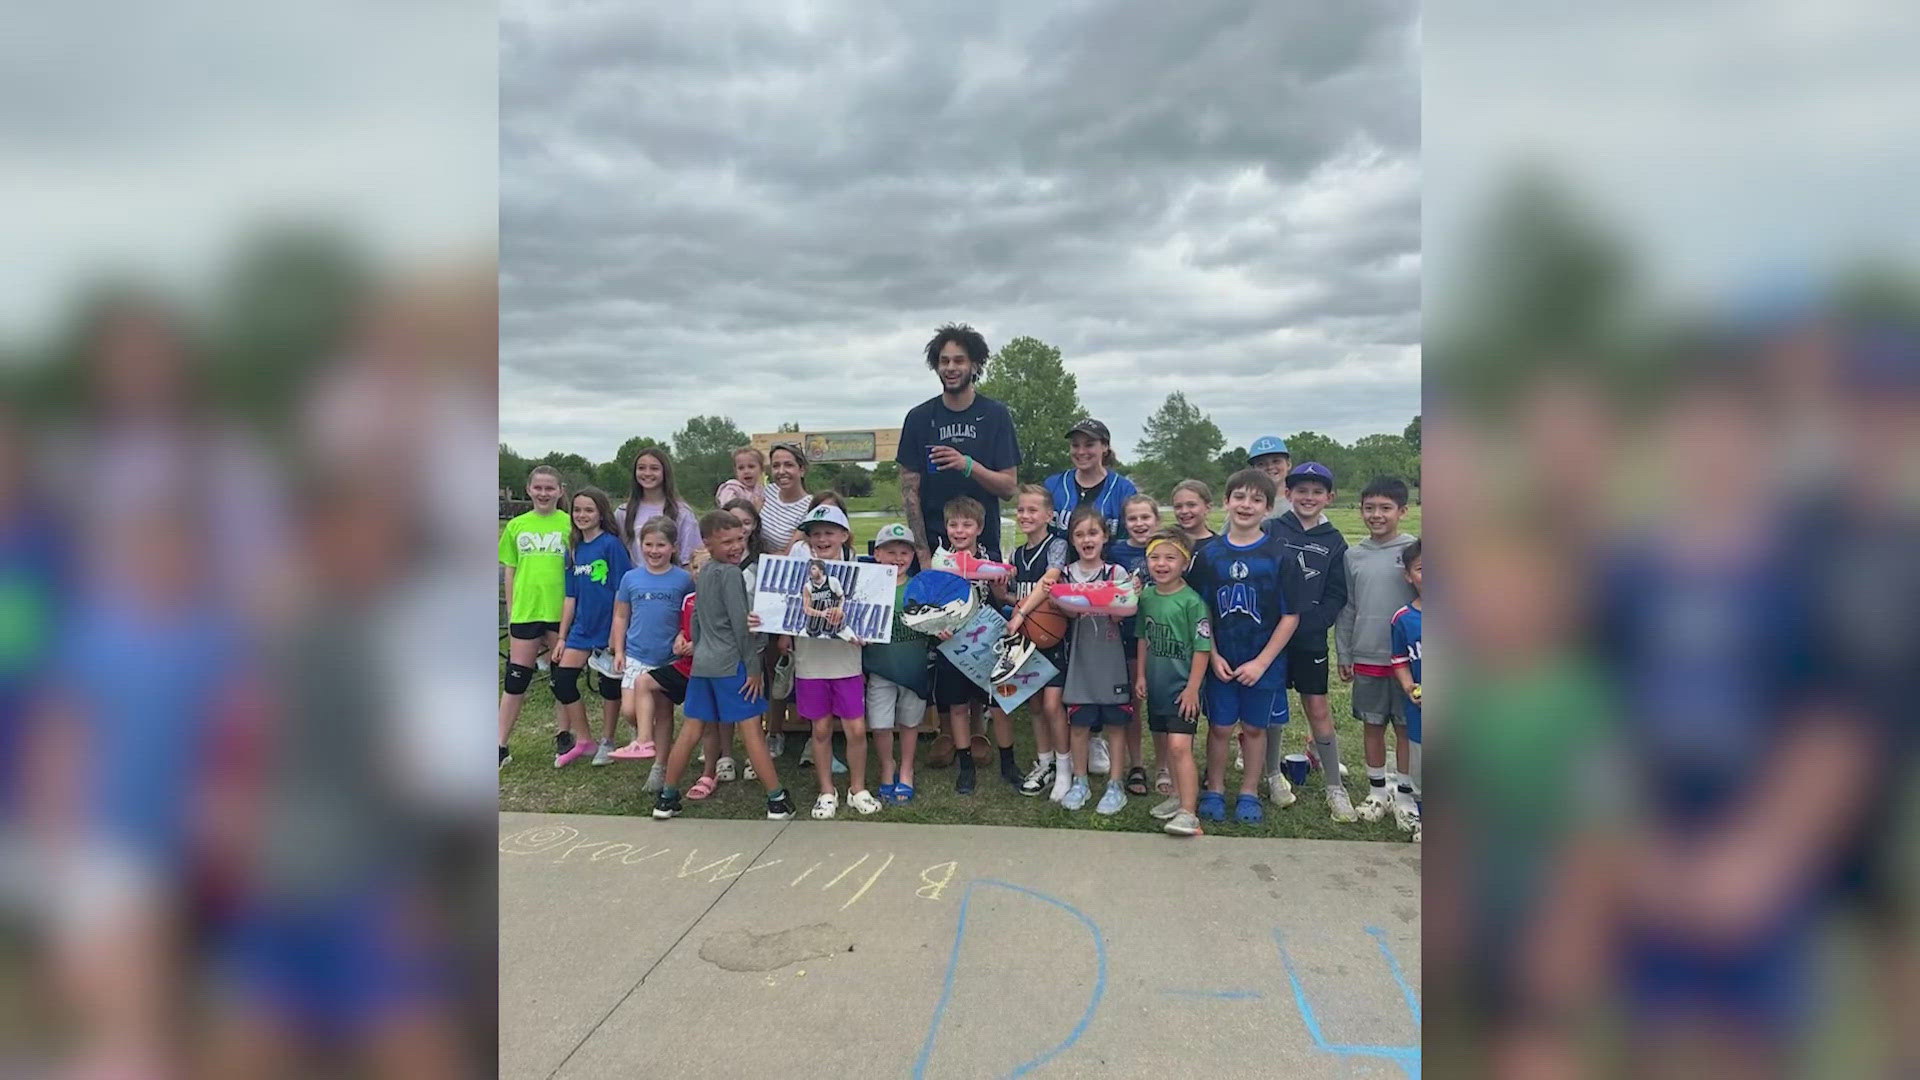 Sean Giggy shares the story of Mavericks rookie Dereck Lively's special bond with a North Texas elementary class.